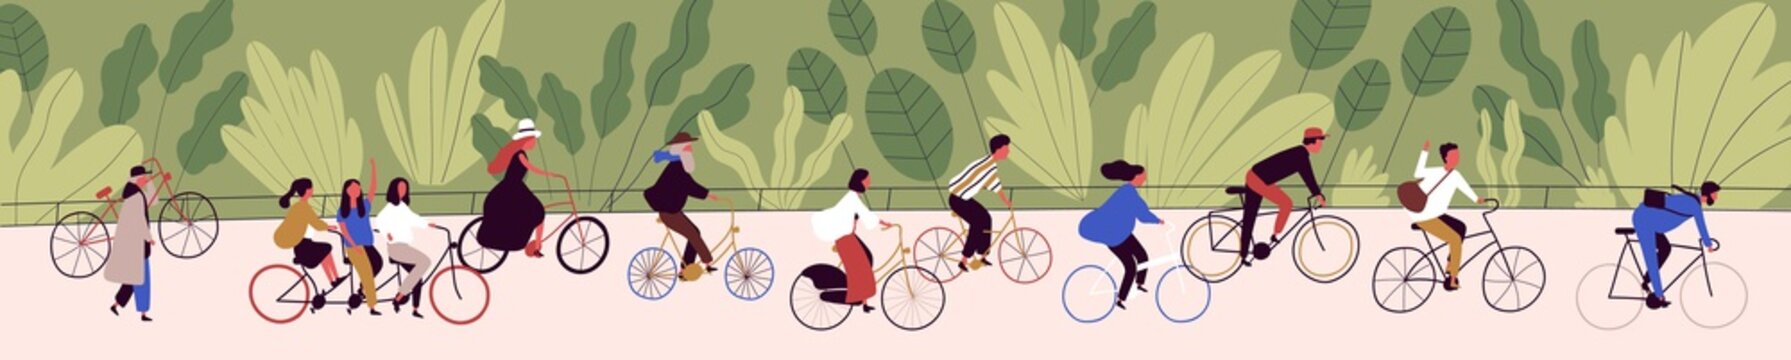 People ride bicycling at bicycle parade vector flat illustration. Active cartoon person cycling on bike path at green nature background. Concept of healthy lifestyle, sports and outdoor recreation.